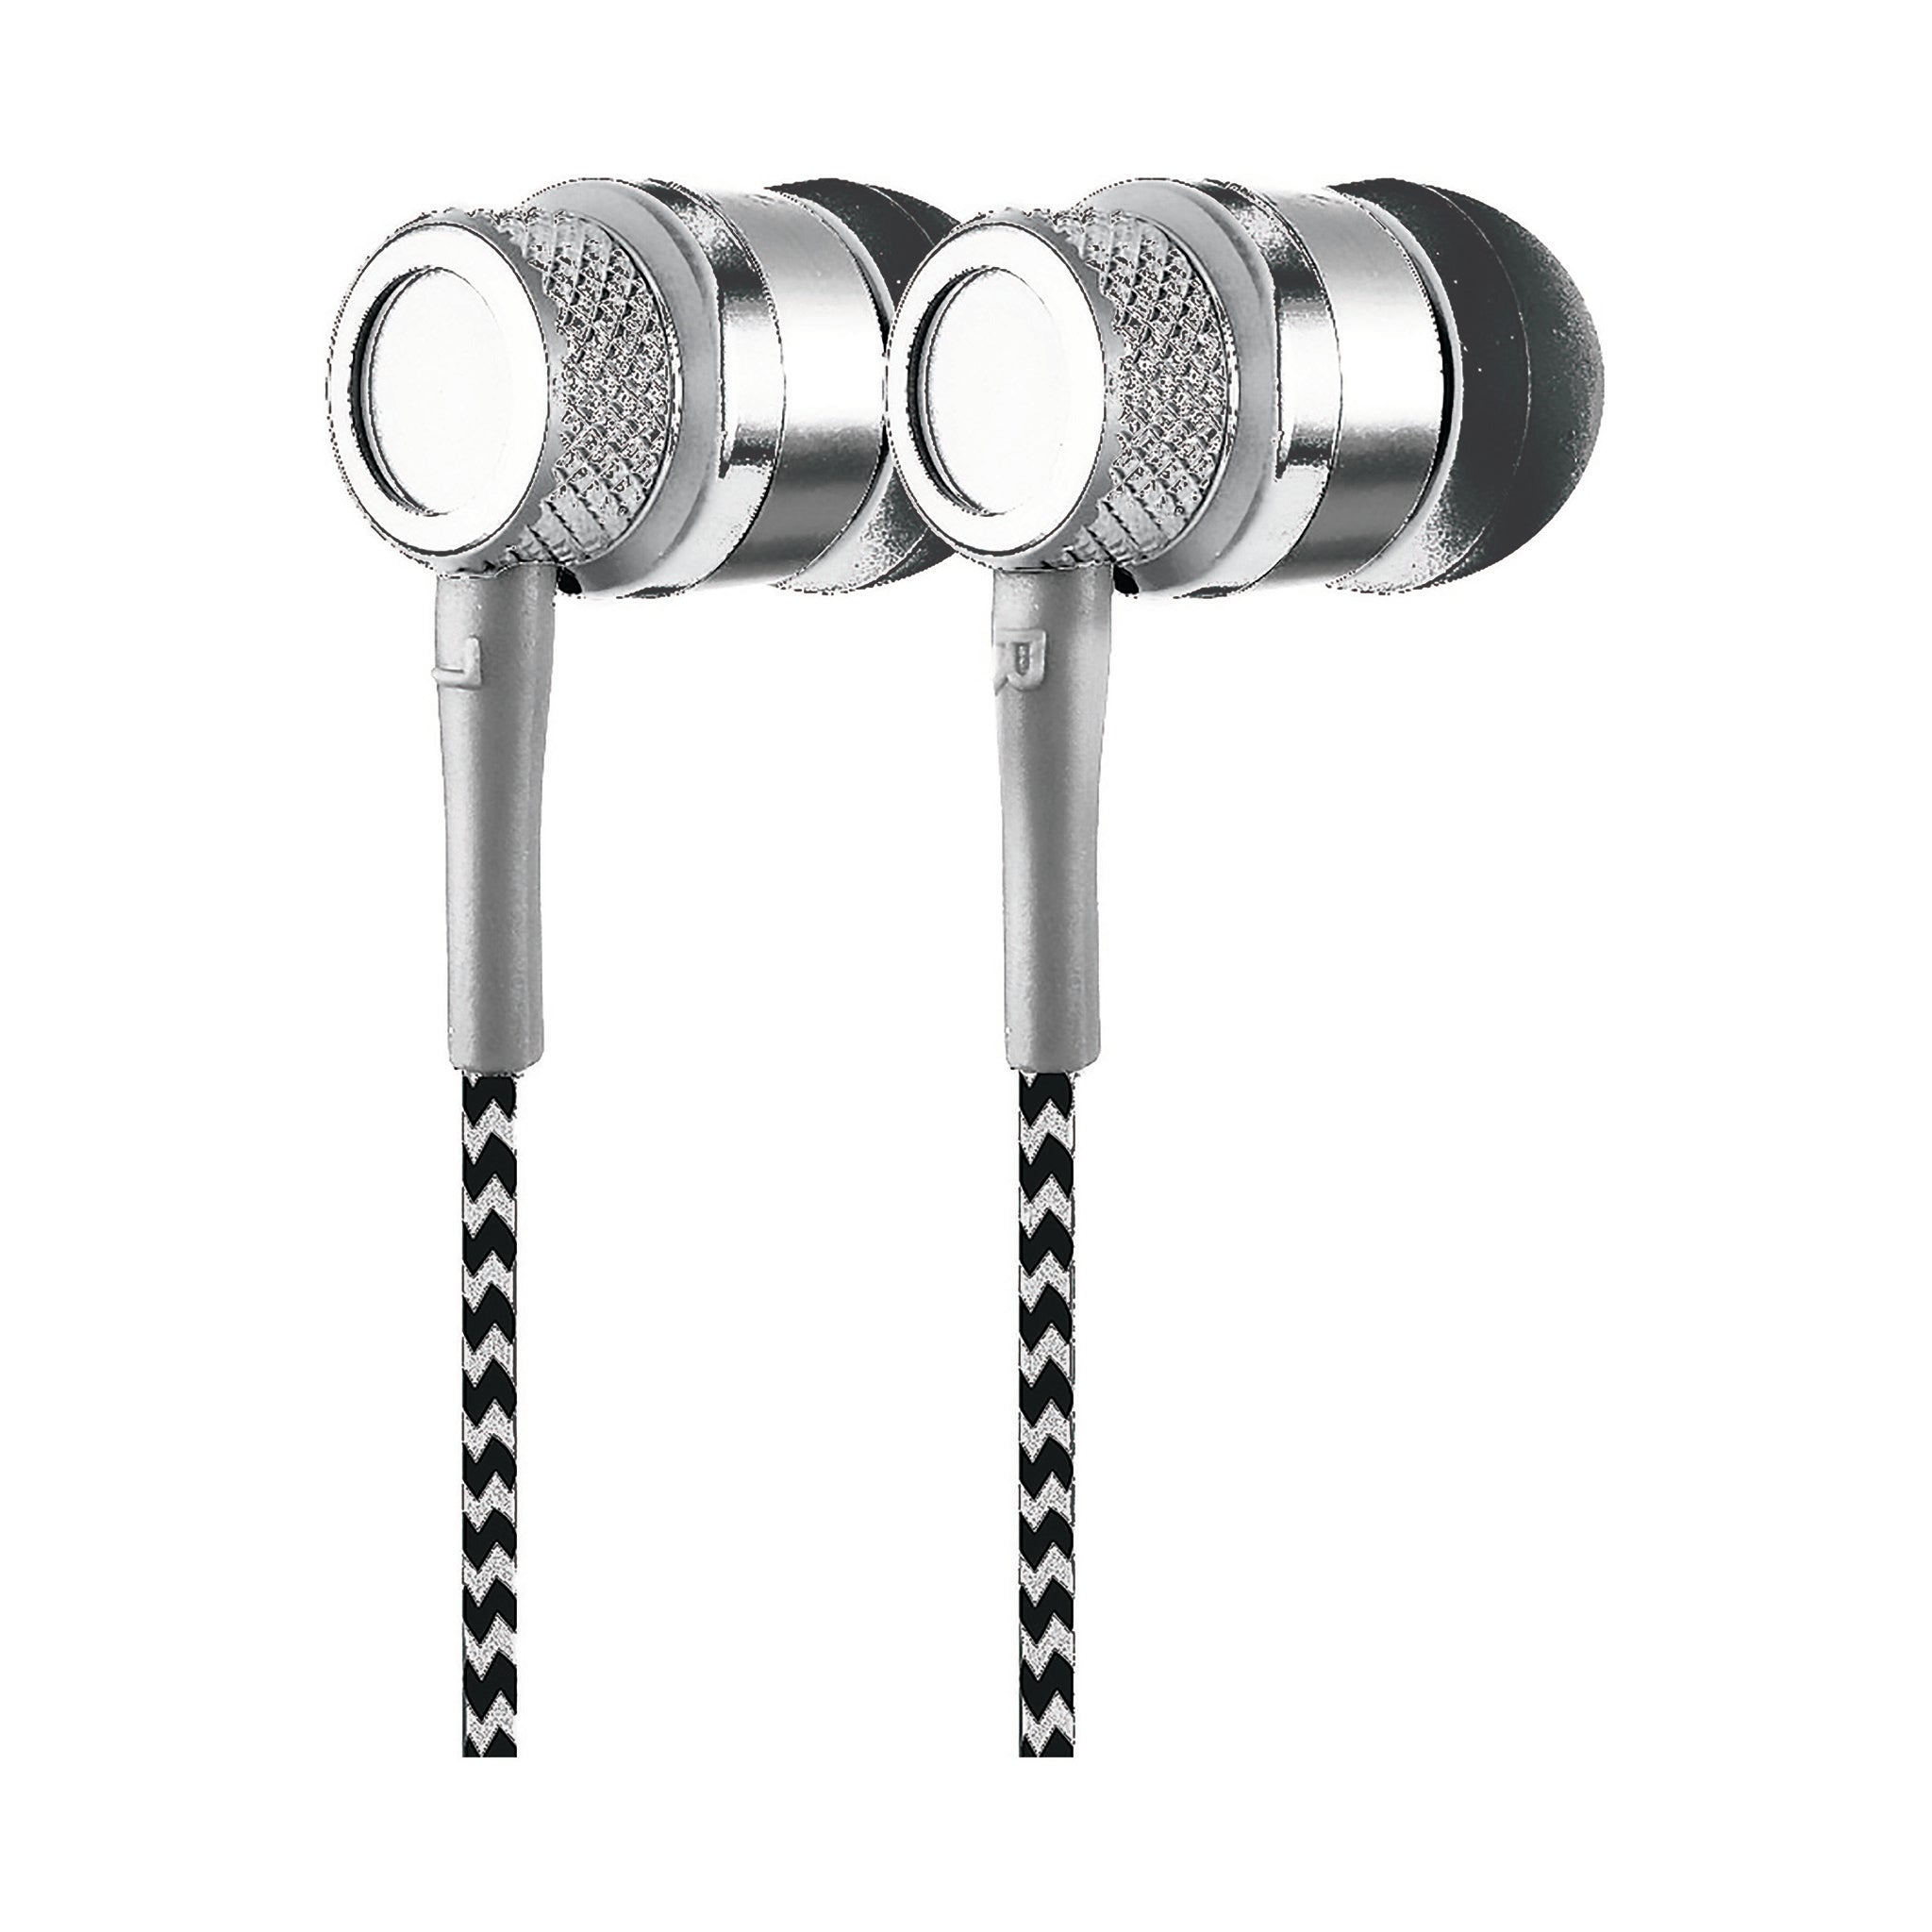 Jammerz Metal Stereo Earbuds